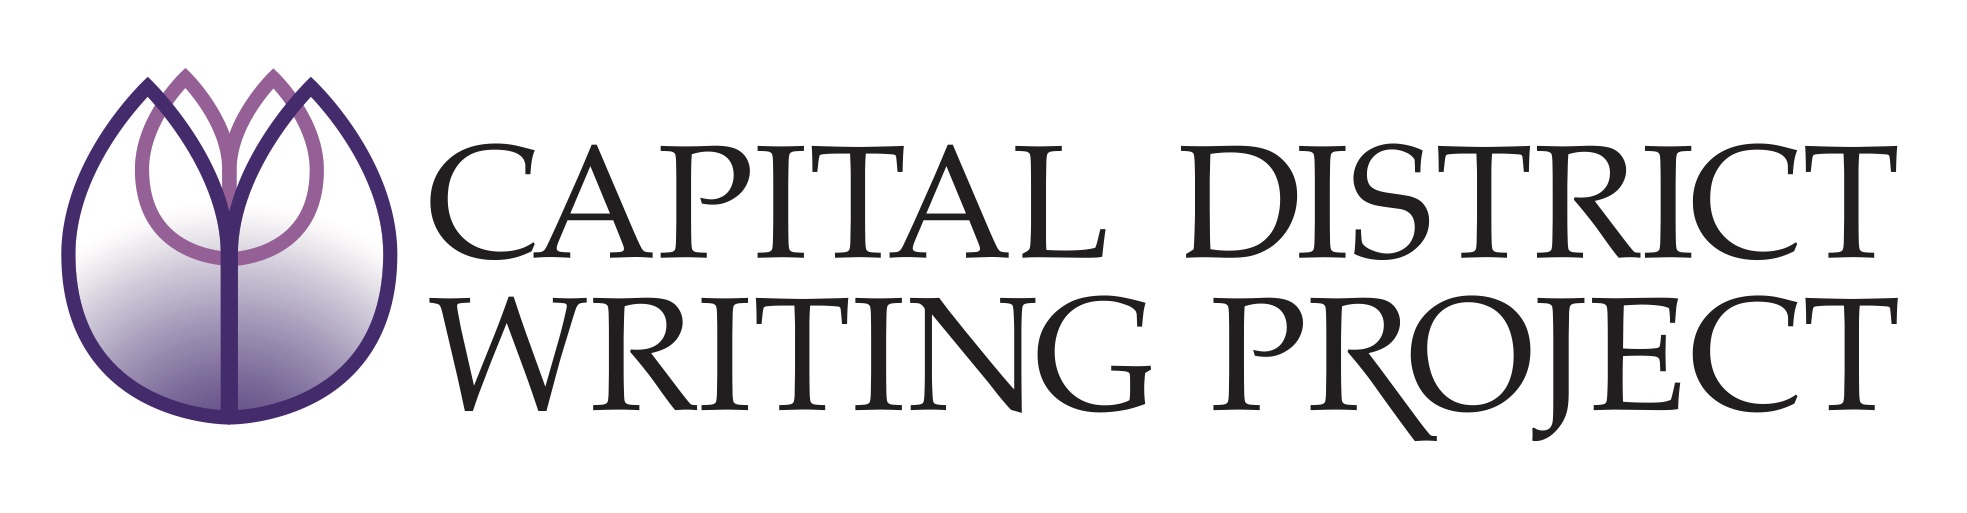 Capital District Writing Project Logo